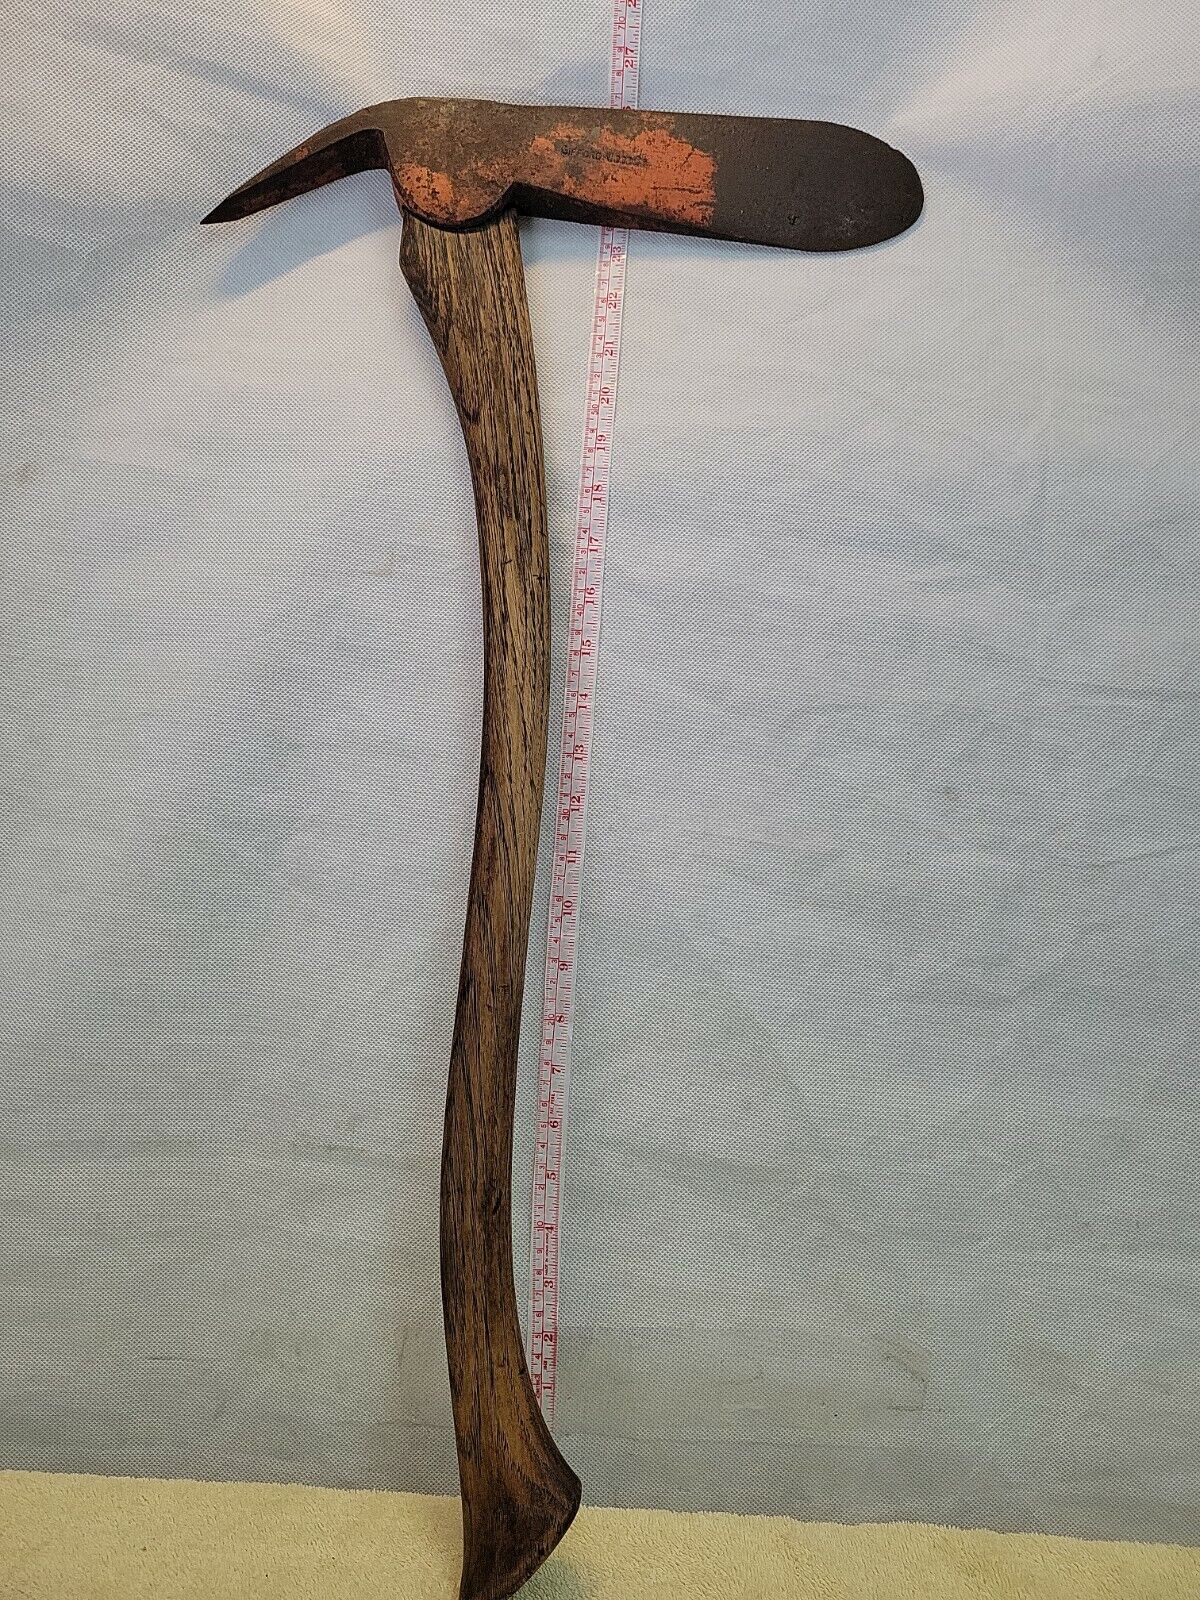 ANTIQUE GIFFORD -WOOD CO MARKED - ICE HARVESTING AXE W/ HANDLE -EARLY 1900S